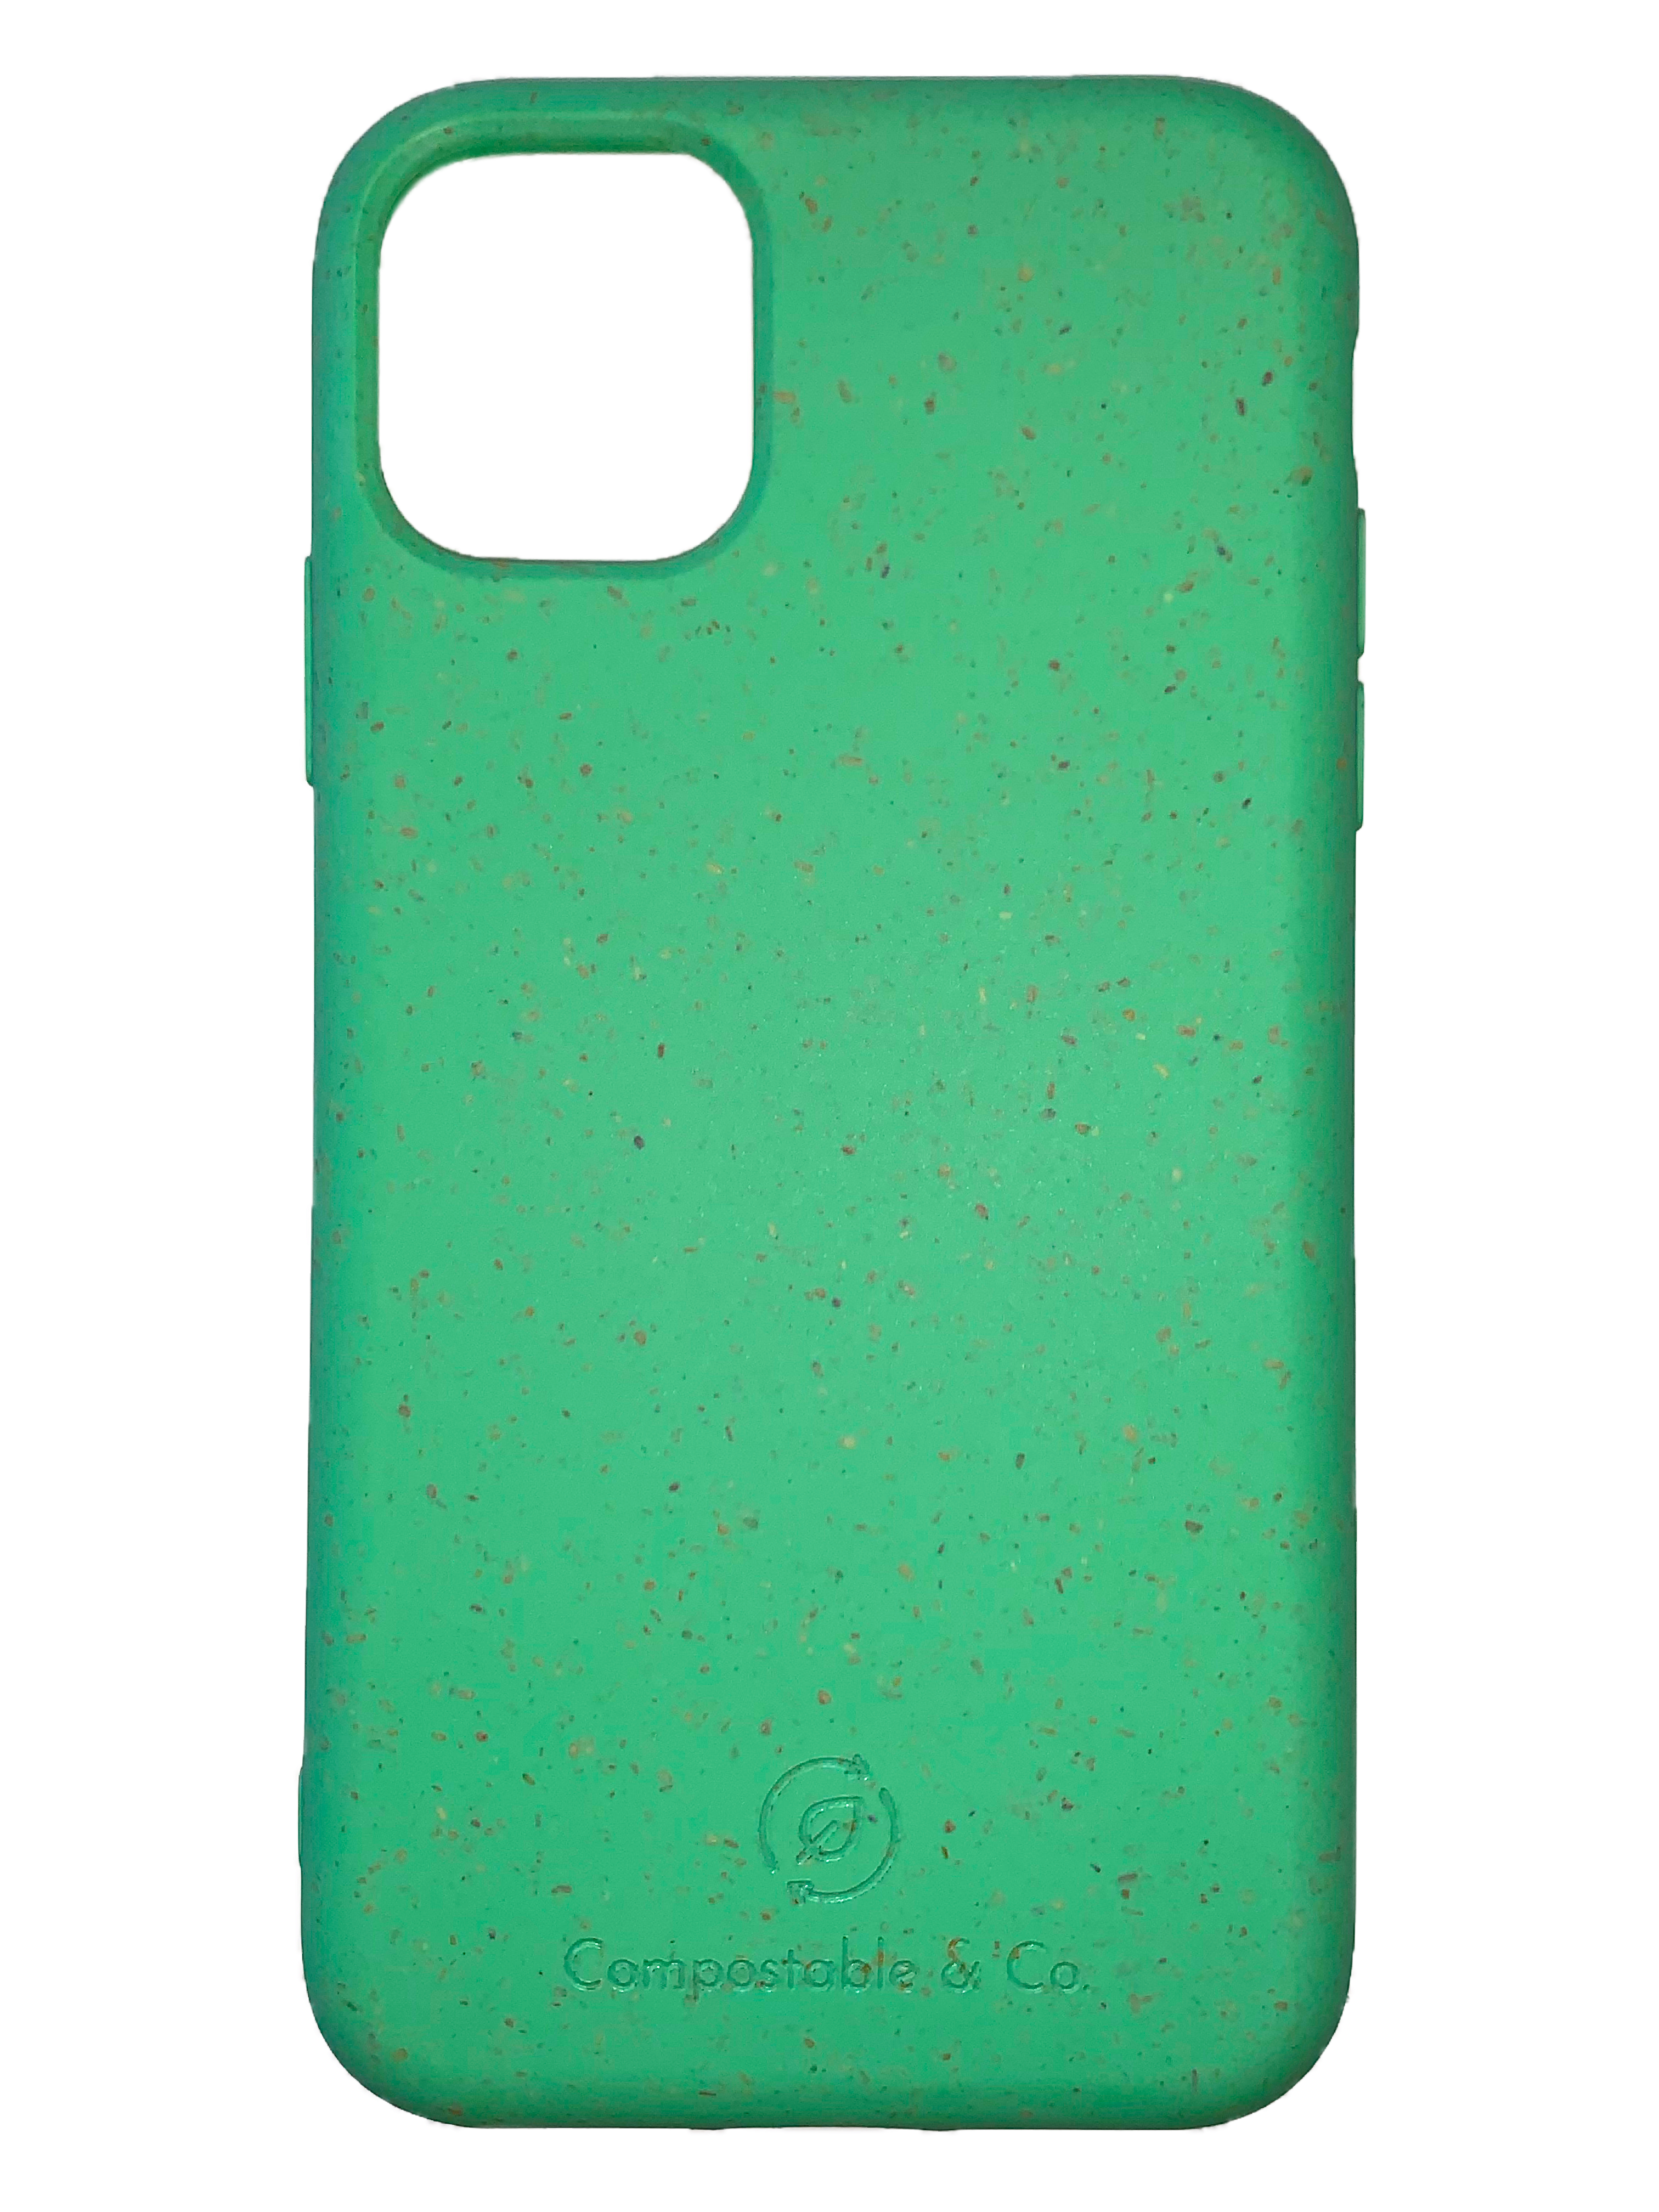 Compostable & Co. iPhone 11 pro green biodegradable phone case